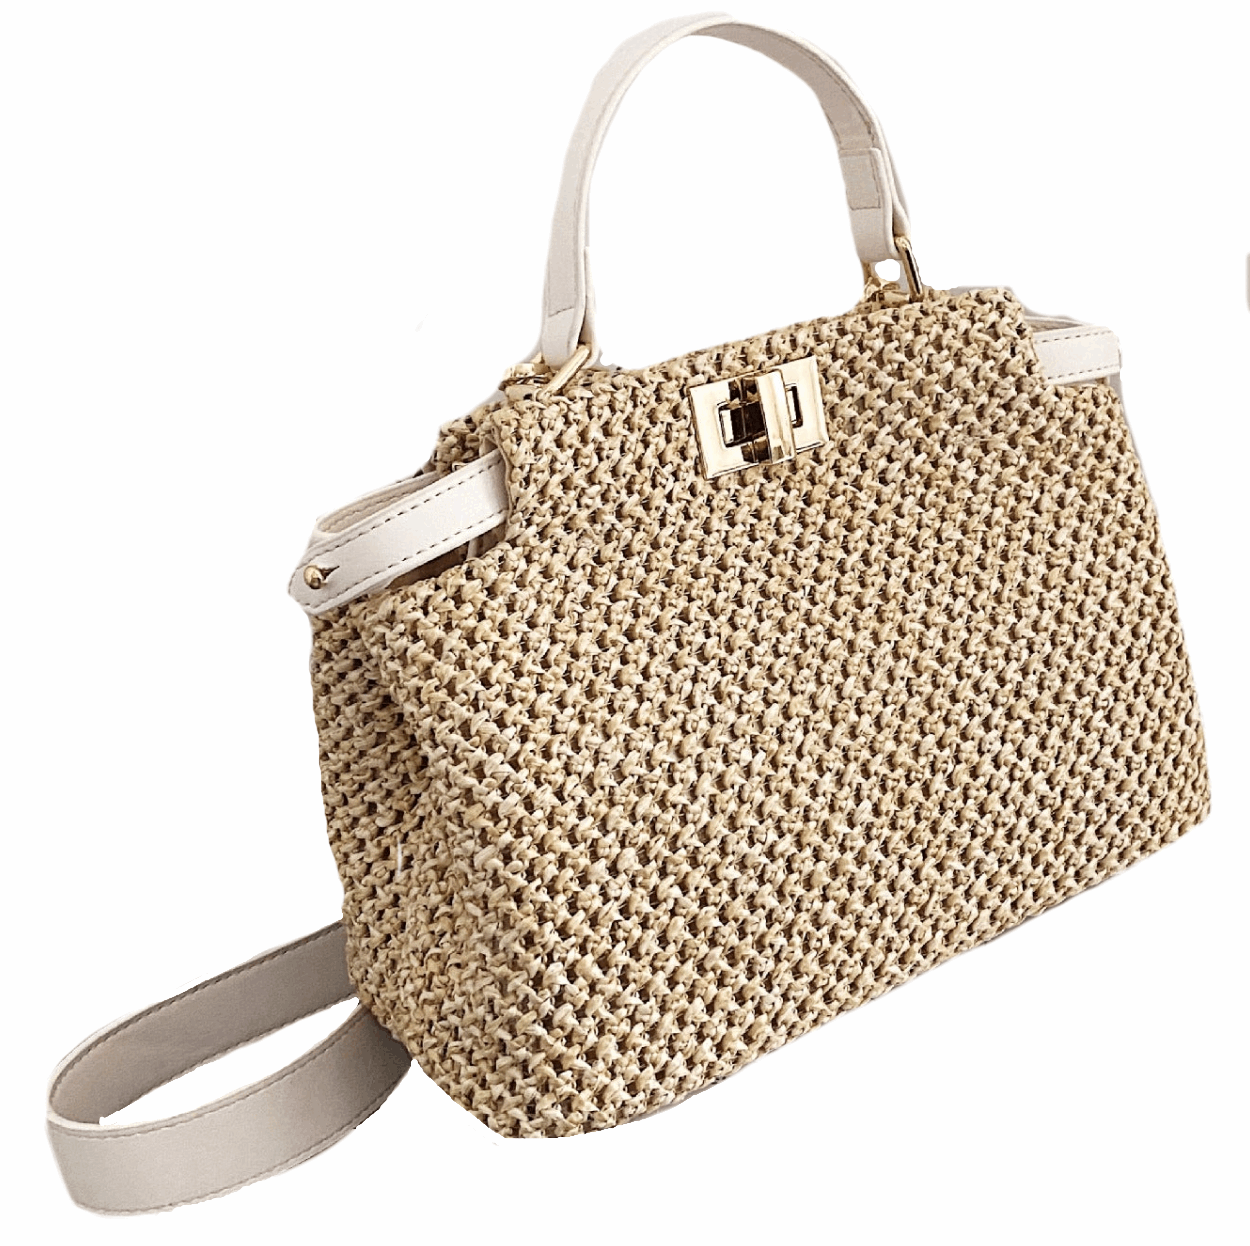 High End Summer Beach Holiday Woven Straw Bag With Stylish Leather Accent in 5 Assorted Colours